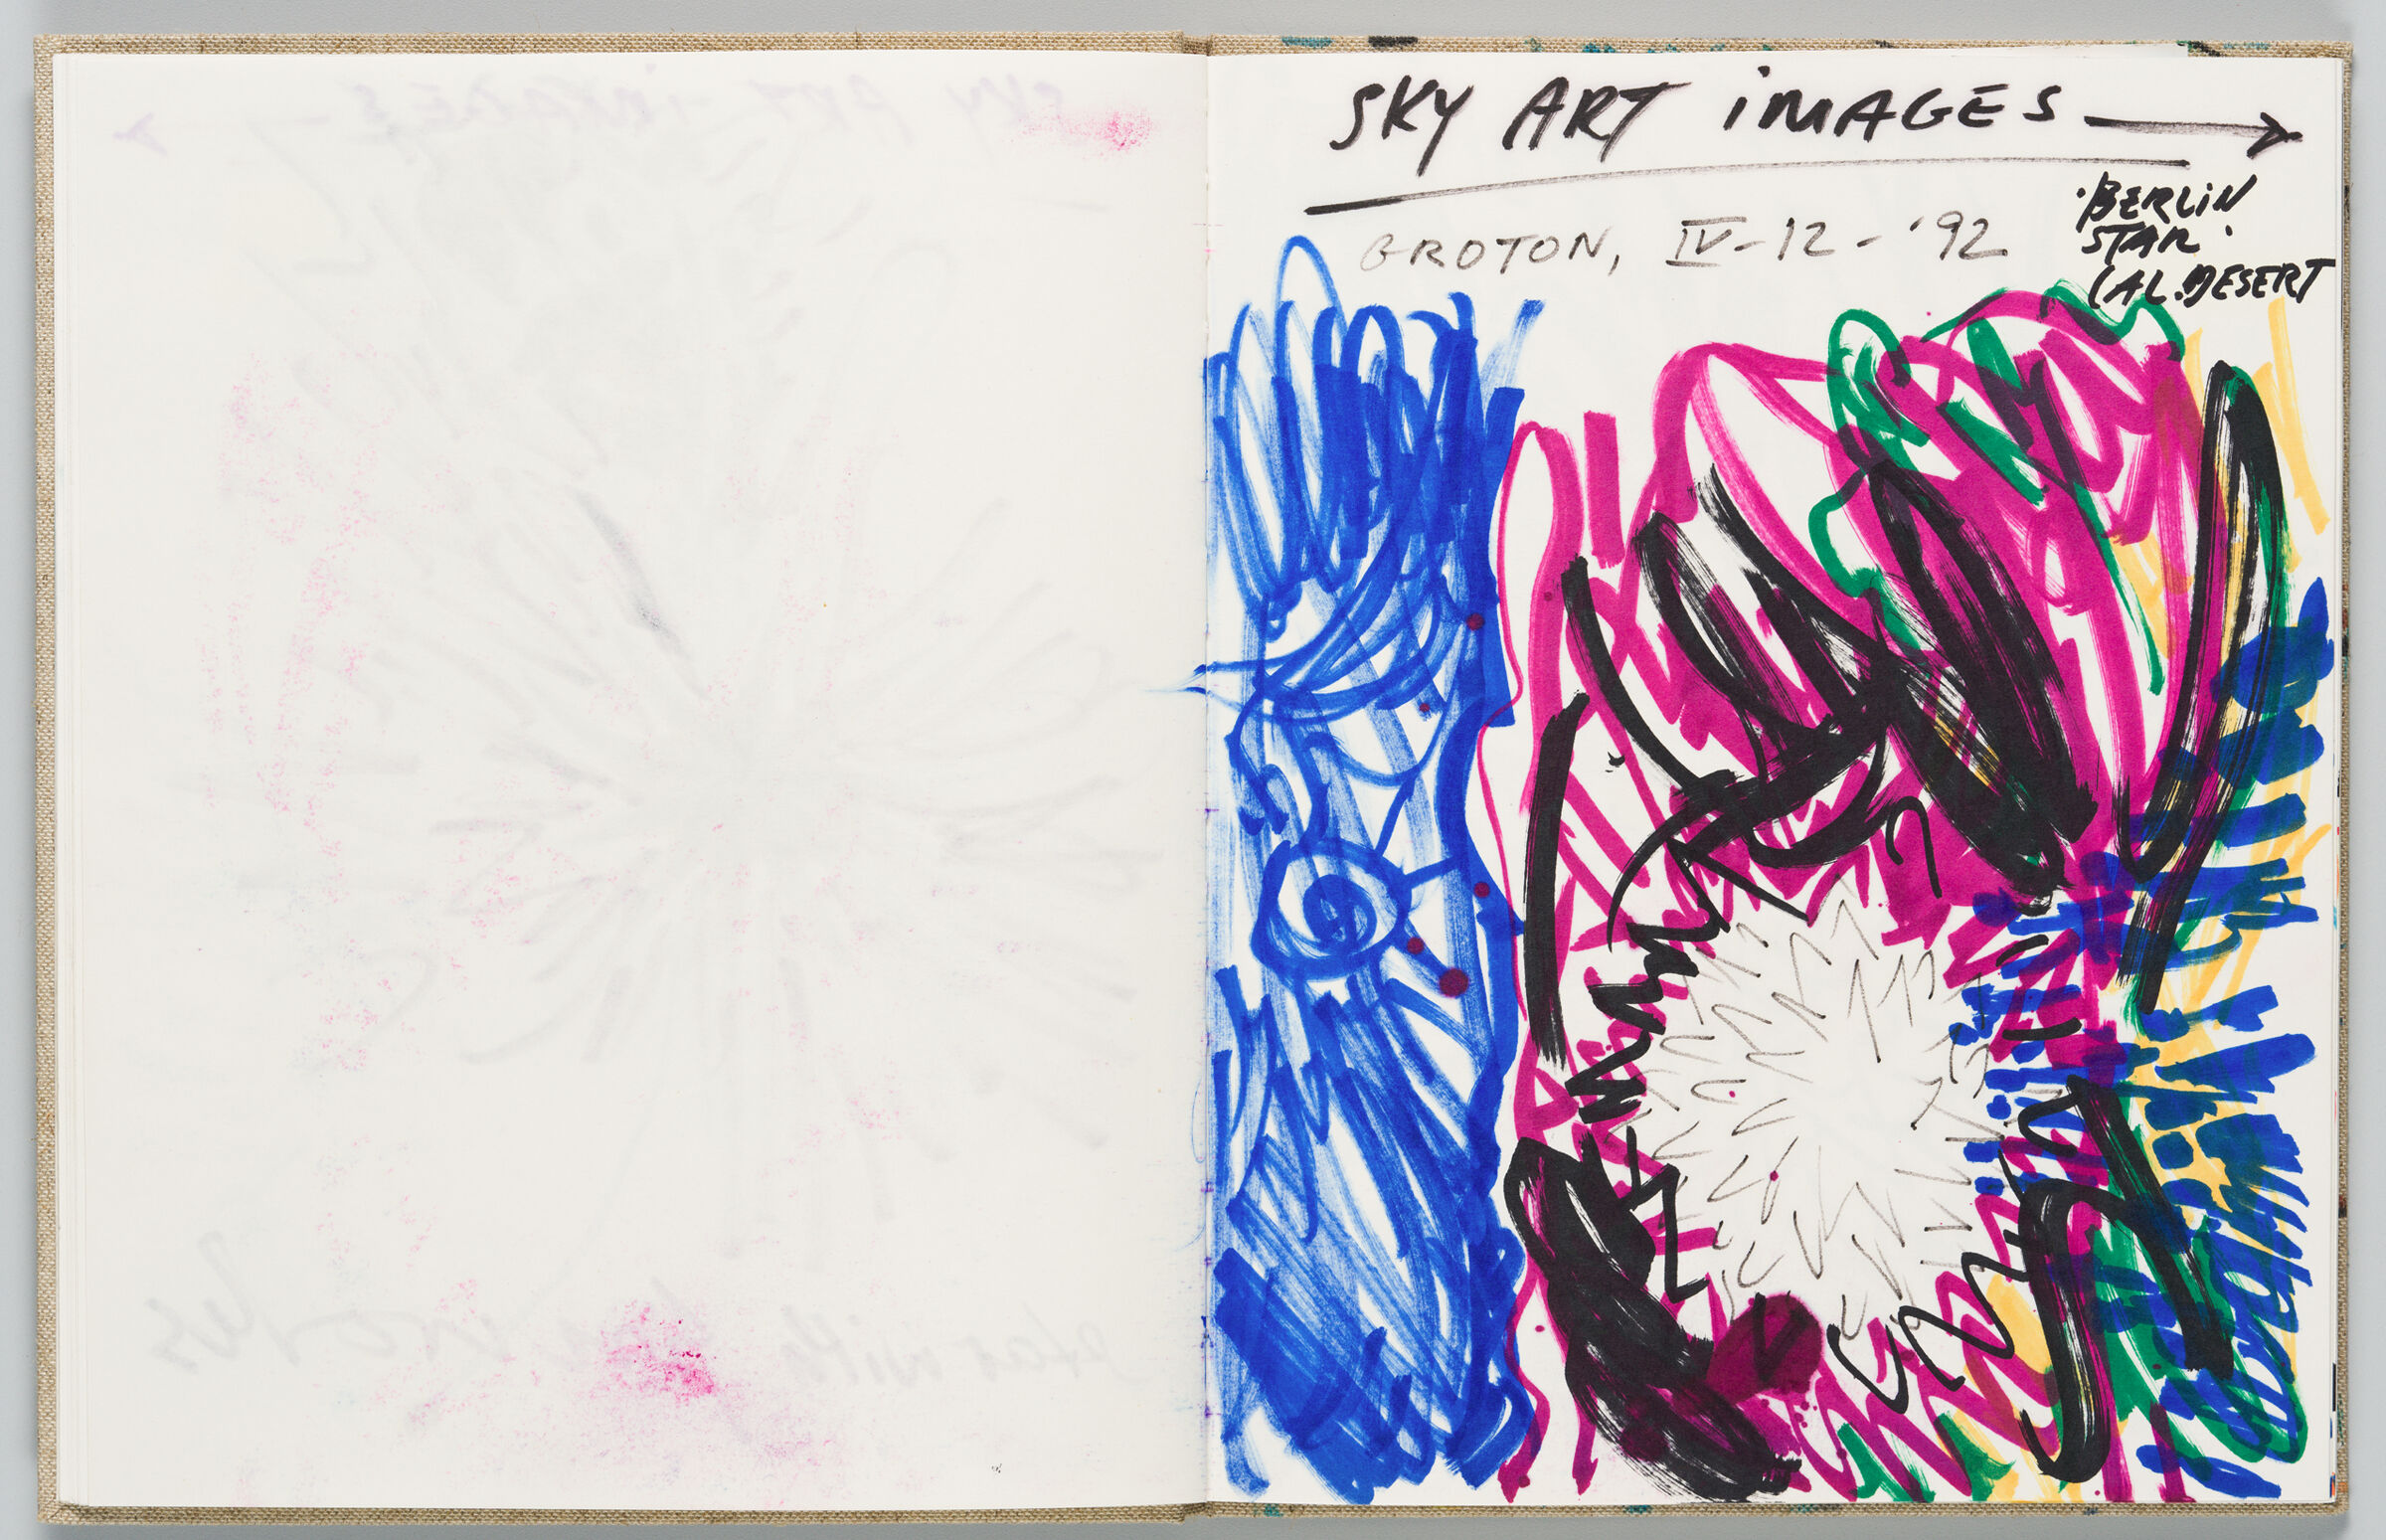 Untitled (Bleed-Through Of Previous Page, Left Page); Untitled (Sky Art, Right Page)